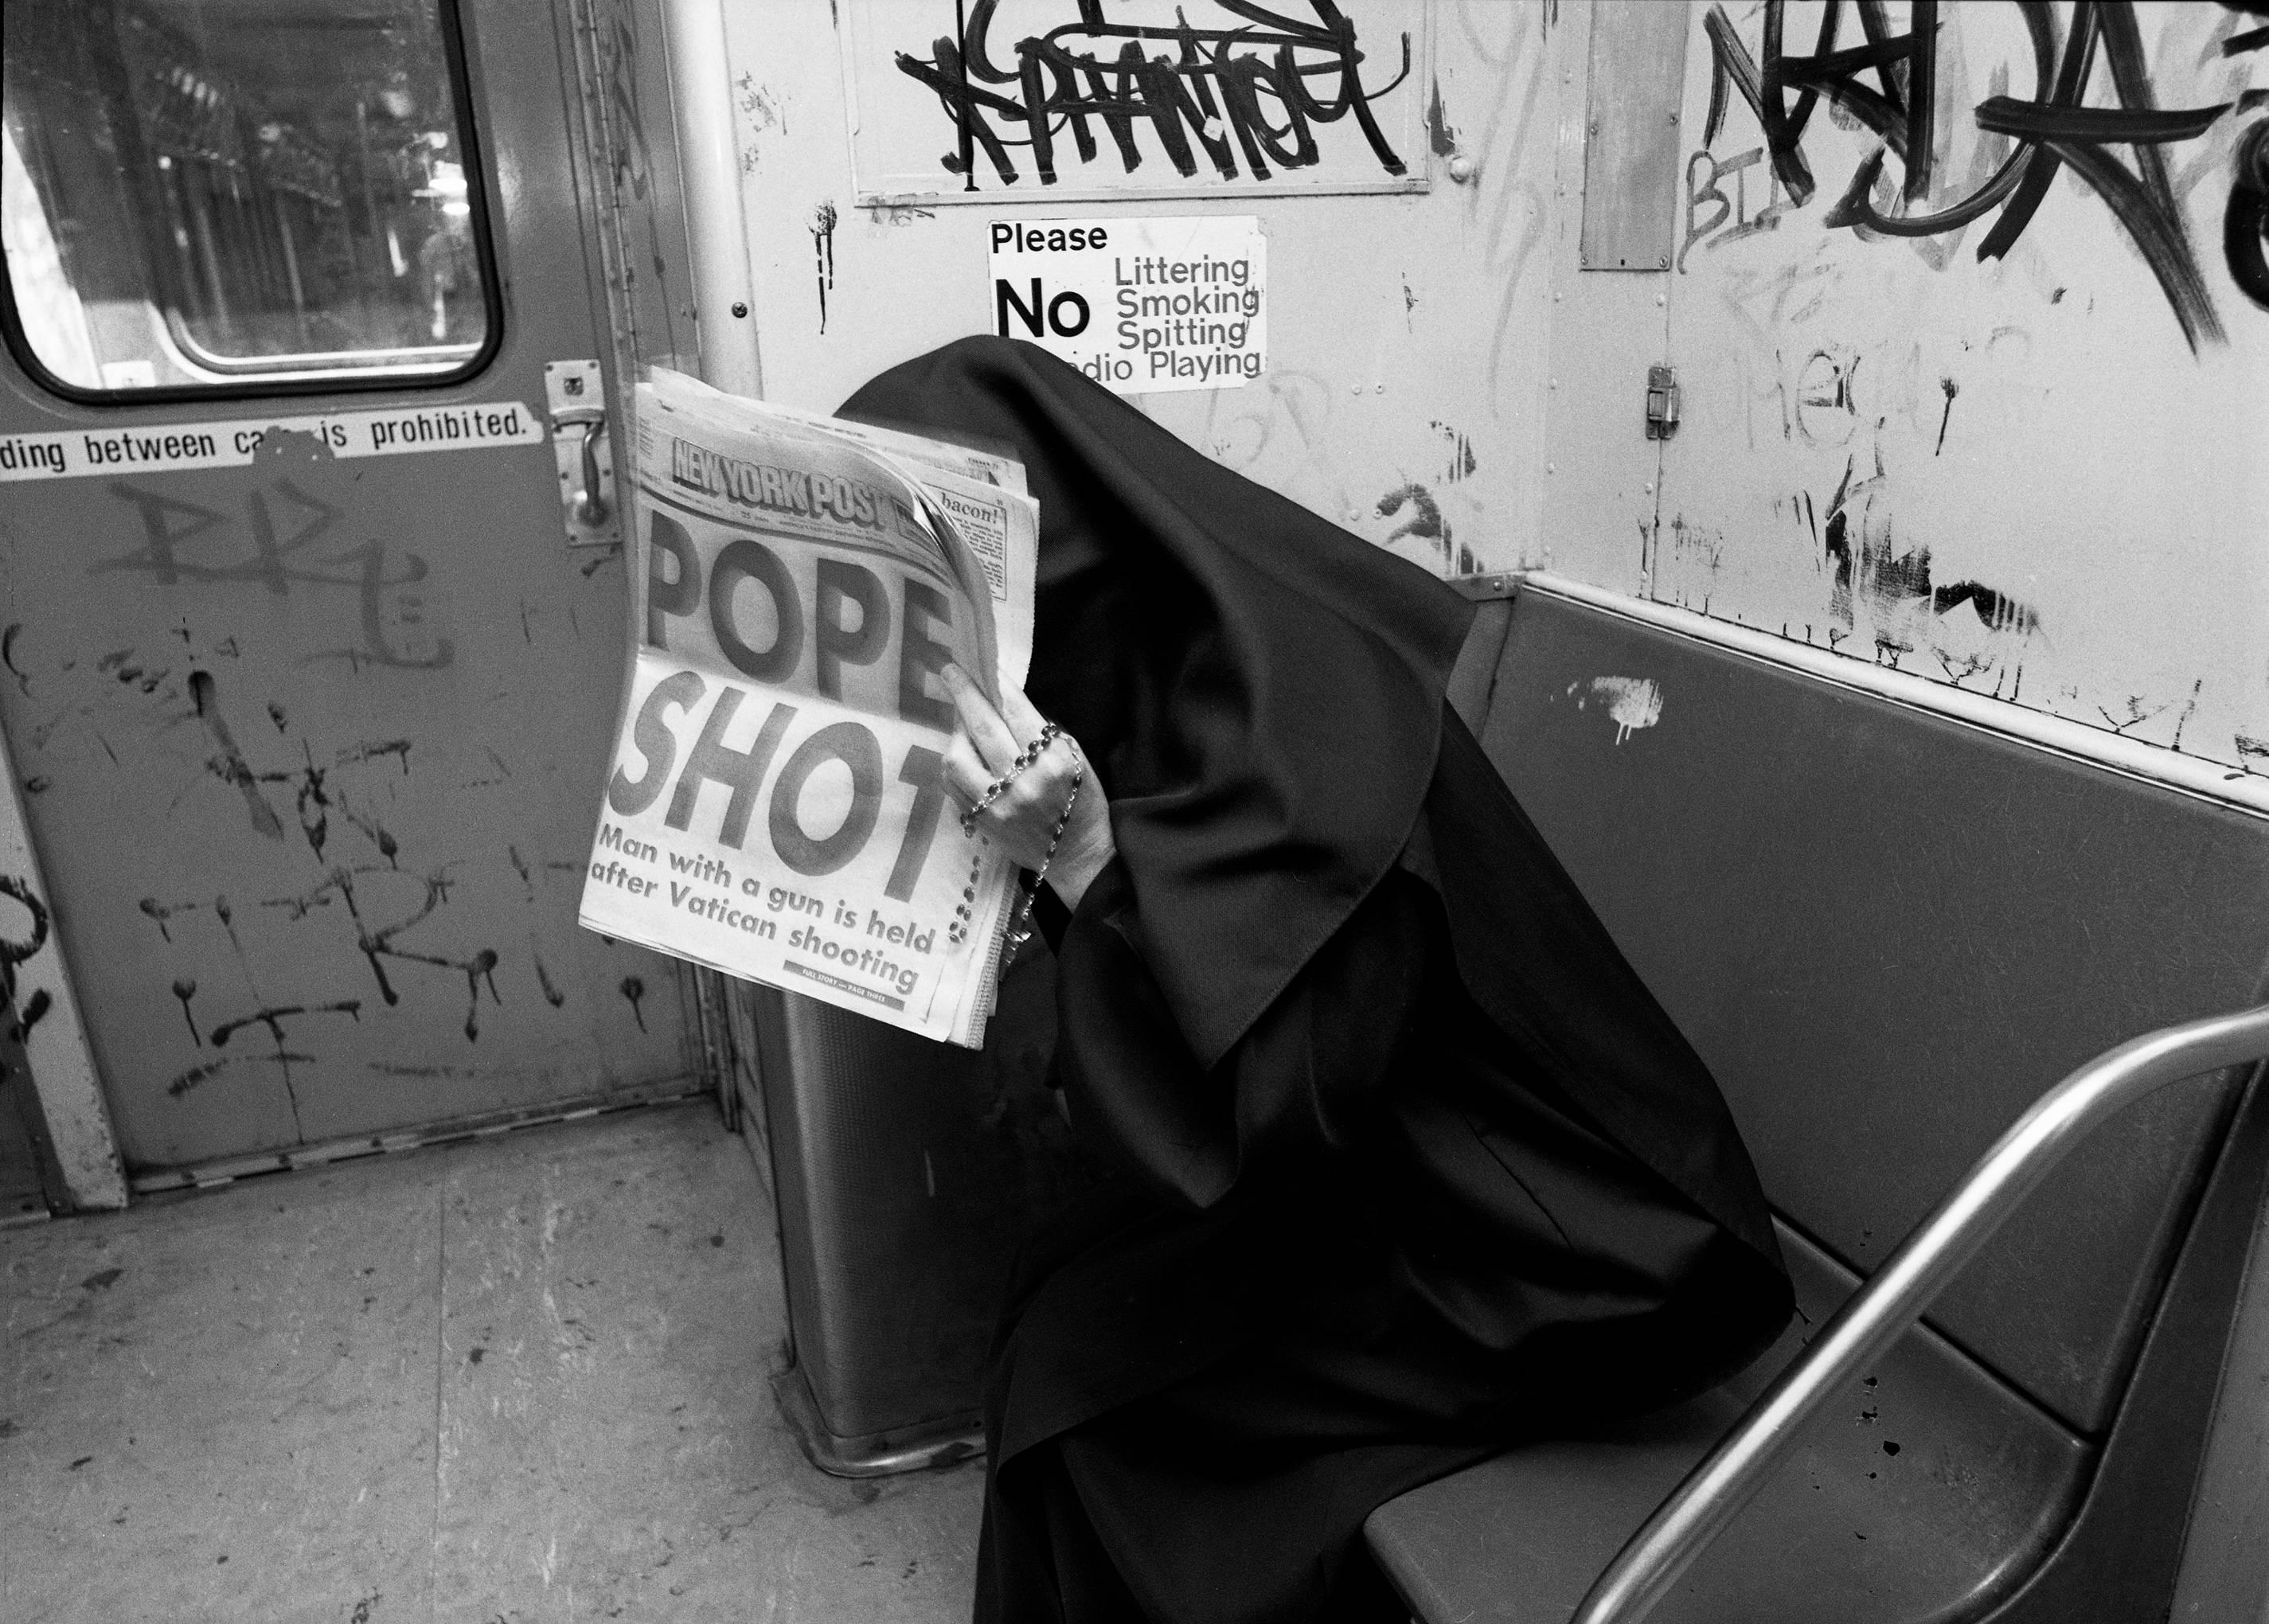 John Conn Figurative Photograph - Nun, Subway, Black and White Limited Edition Photograph, NYC, 1970s, 1980s